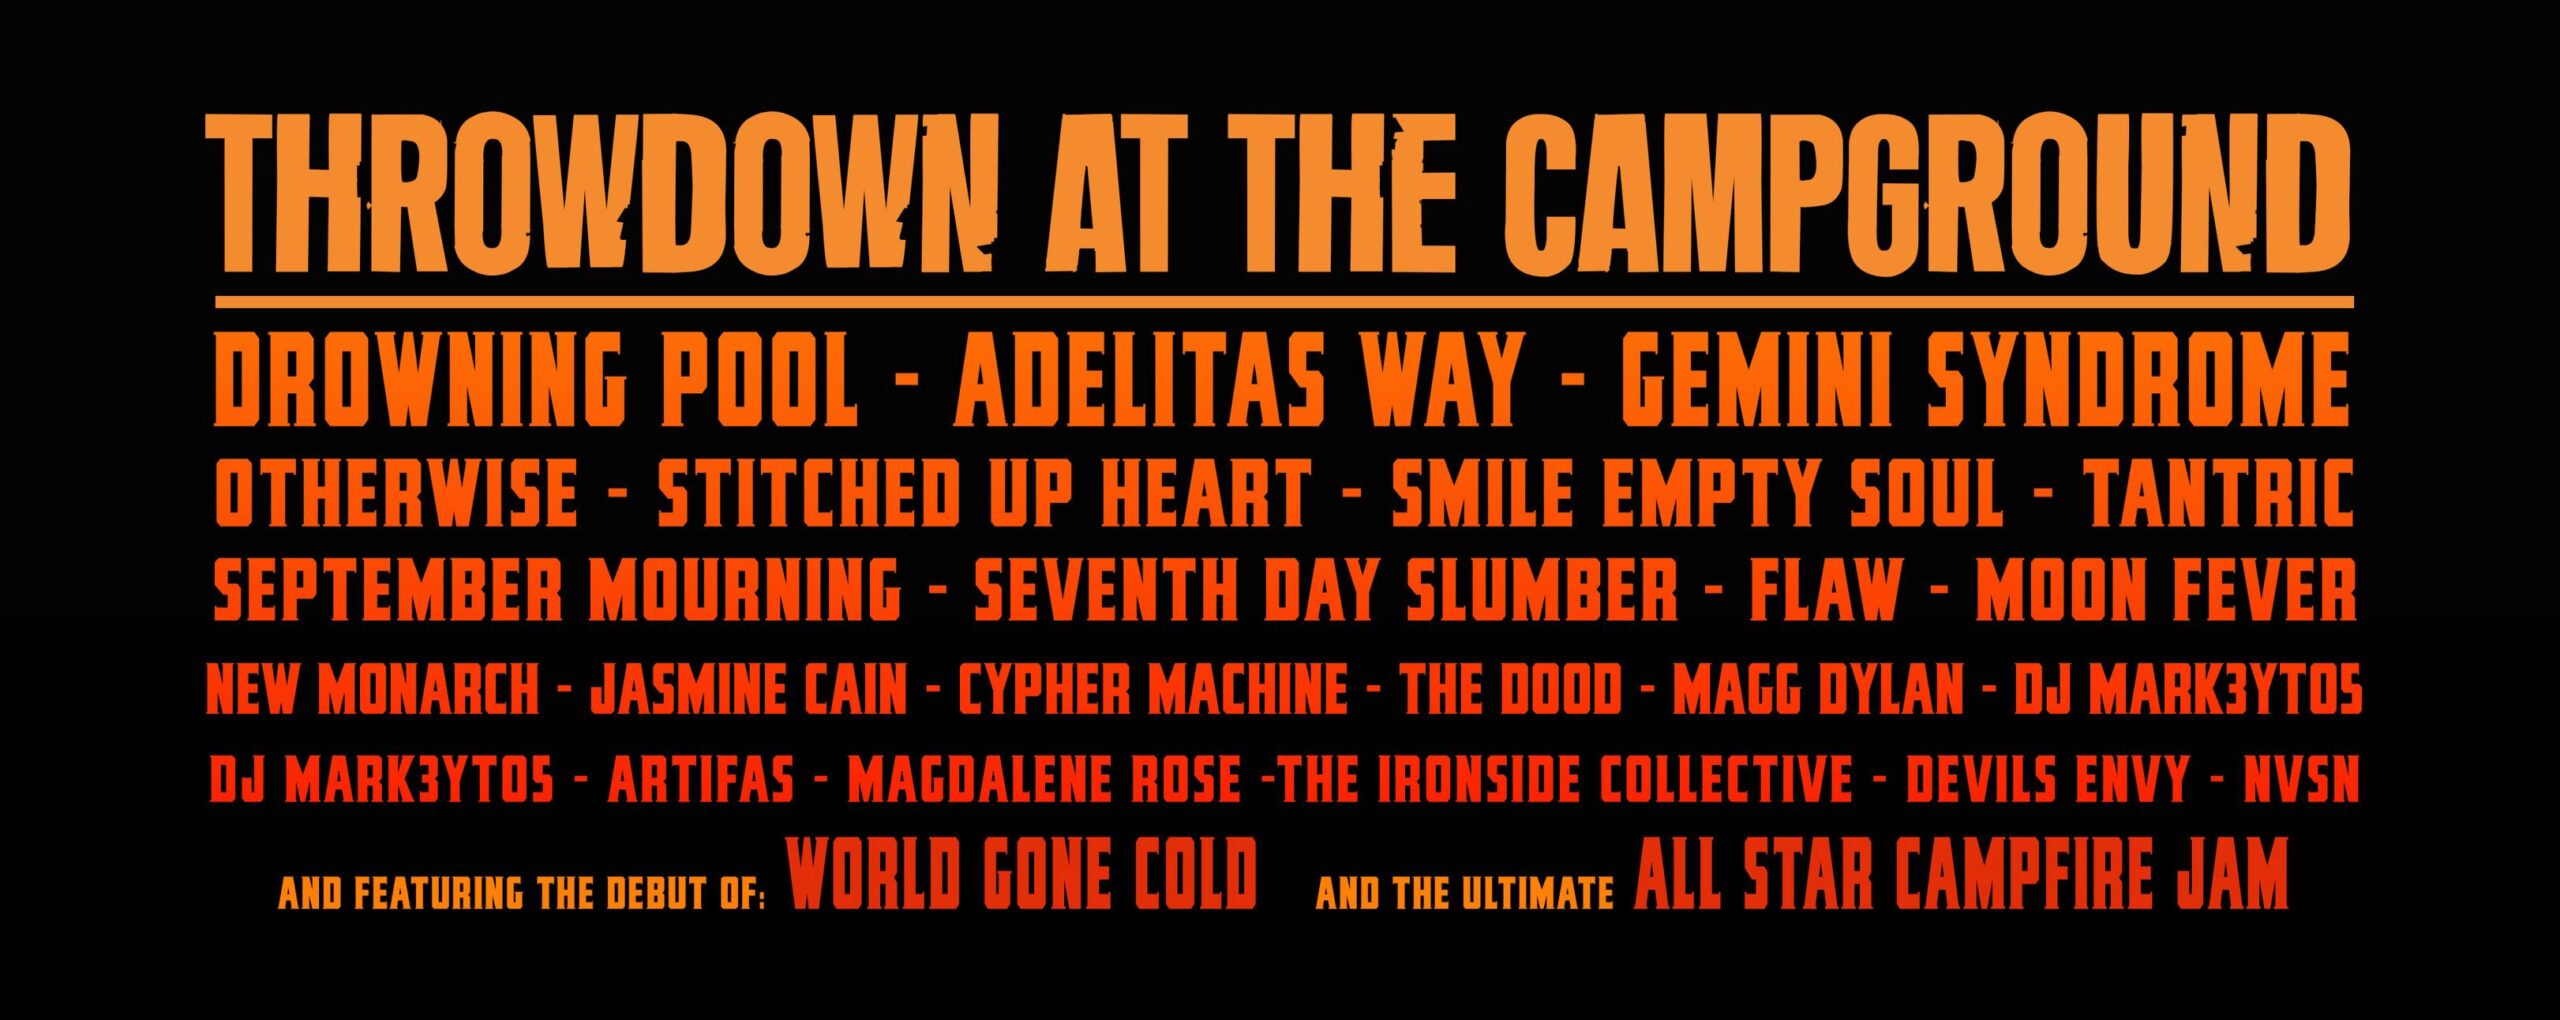 Throwdown at the Campground flyer